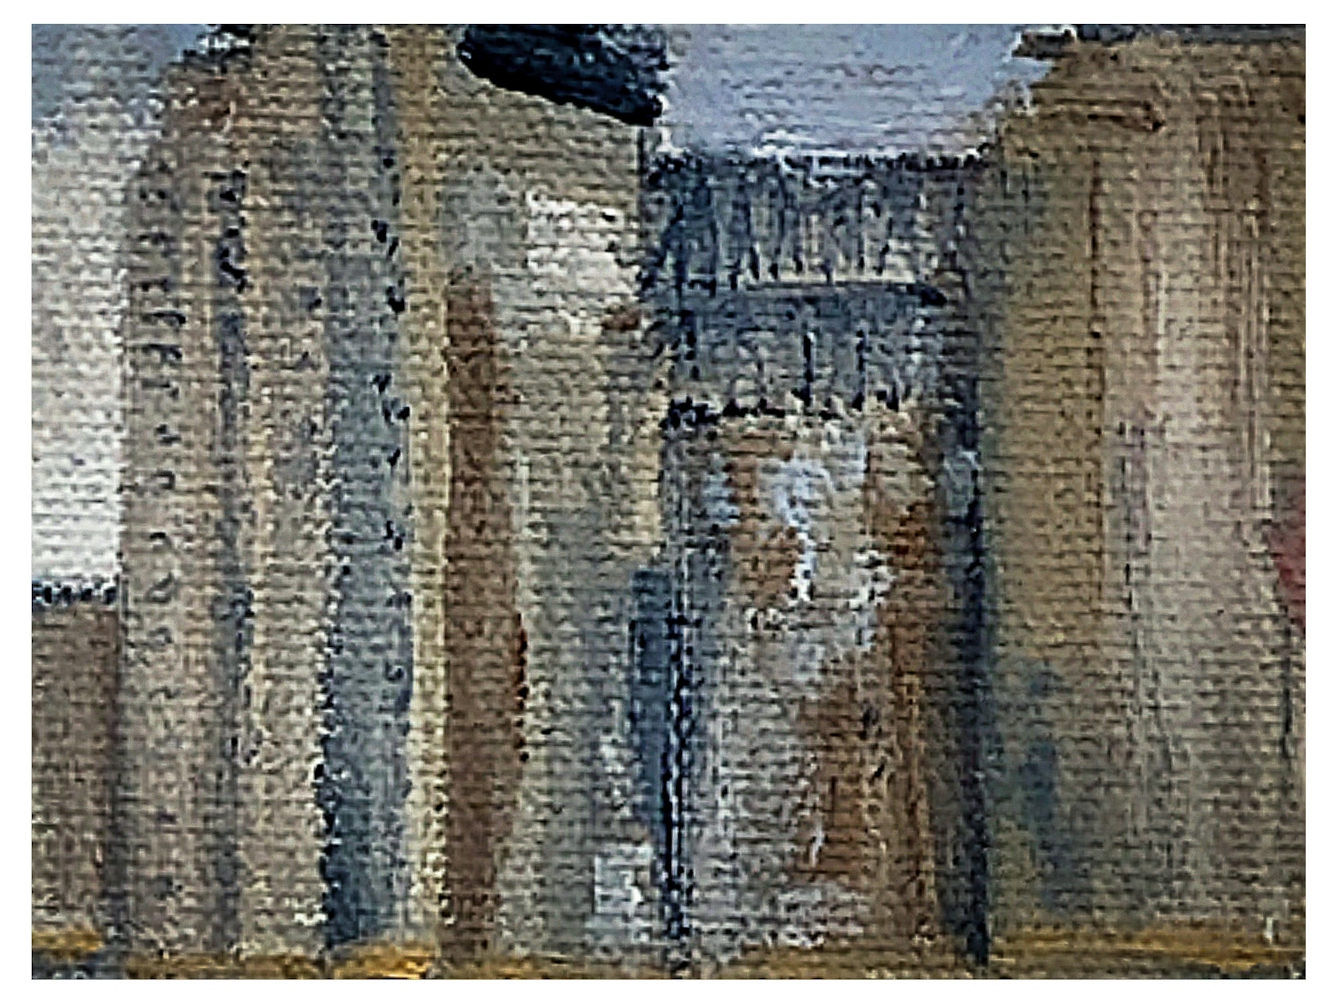 Photograph of a detail of a larger oil on canvas painting. The painting has been created with bold, think, textured brush strokes in a semi-abstract manner. The scene depicted is of Battersea Power Station in London with its distinct tall white chimneys and rectangular brown brick construction. The scene shows the power station after having been decommissioned and shows signs of dilapidation. 